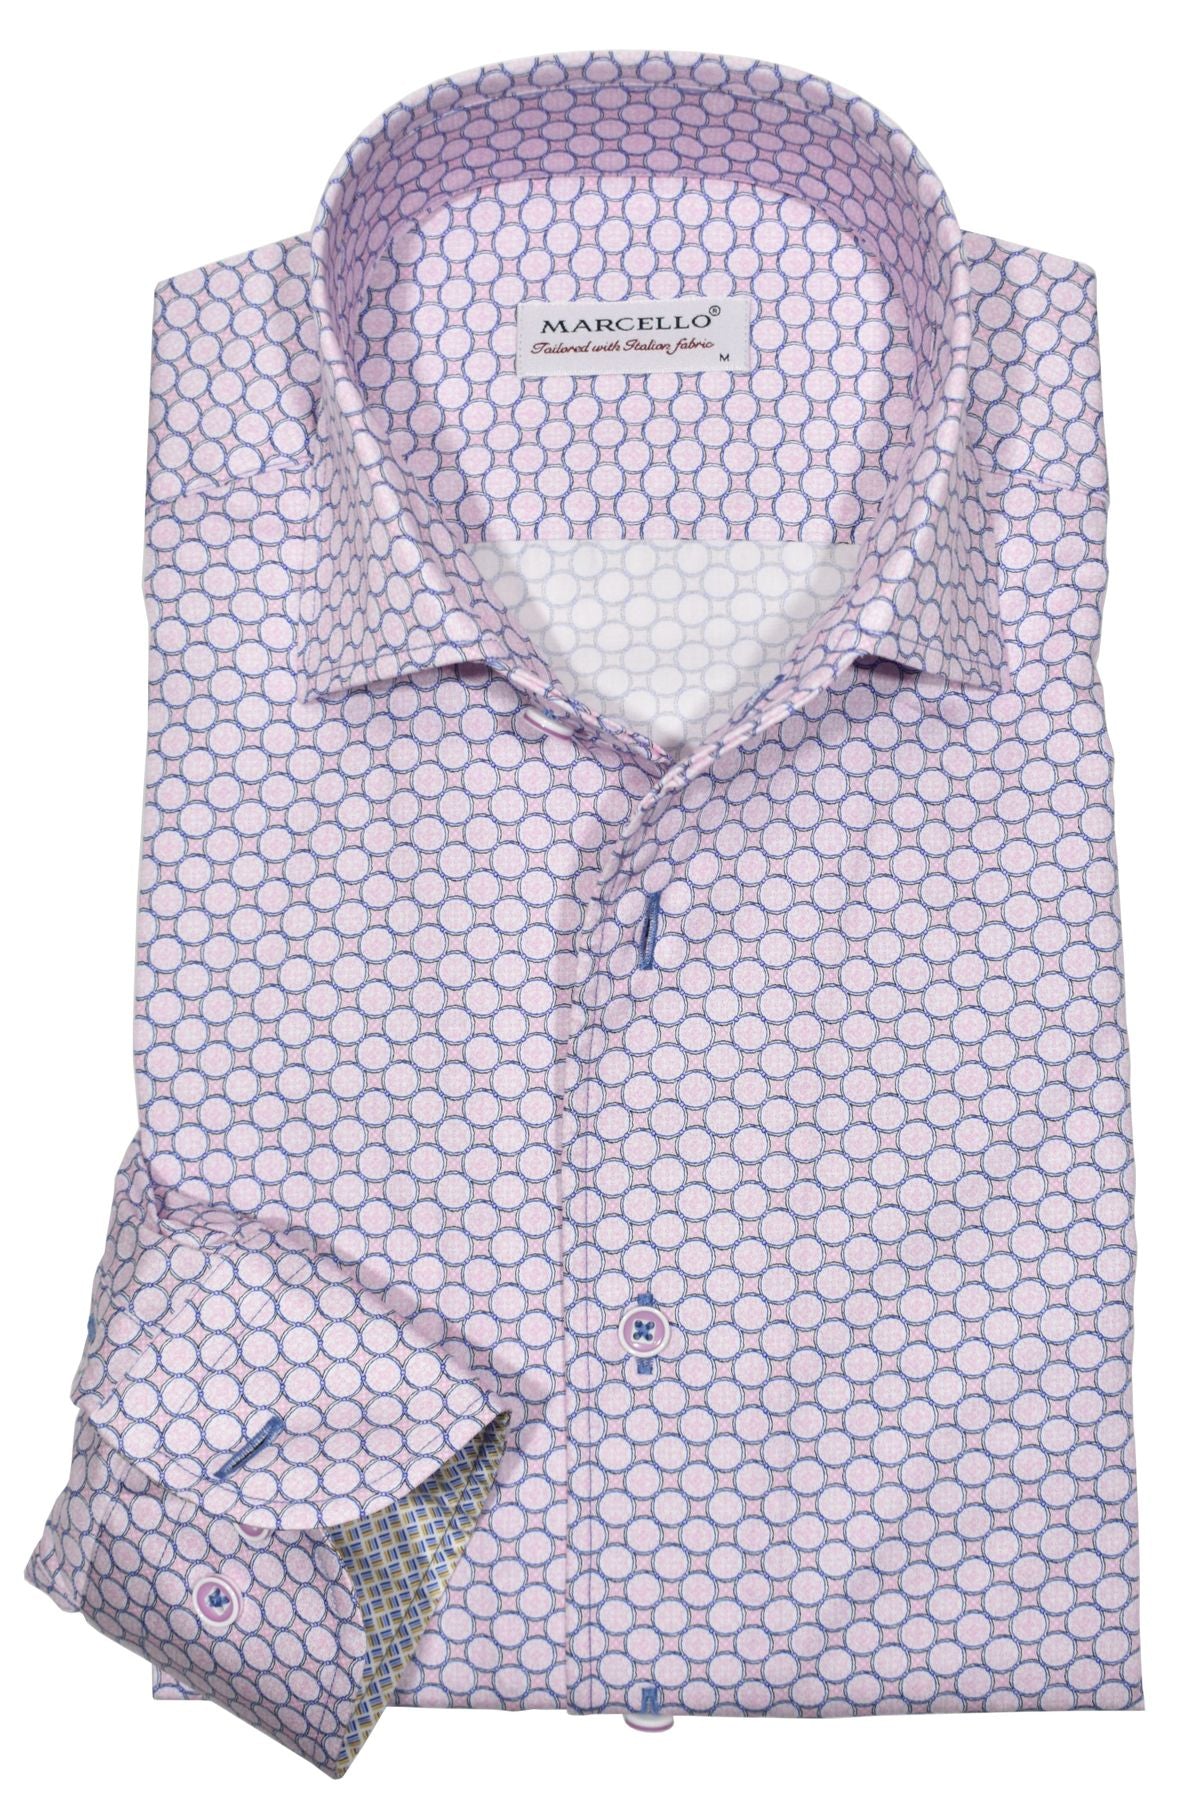 The Marcello exclusive design is like no other, creating a dignified look with a collar that stands perfectly whether worn alone or under a sport coat. Its unique placket ensures a smooth, crisp appearance.  Luxurious cotton fabric. Traditional pink tones and a navy circular pattern creates an excellent updated traditional sport shirt.